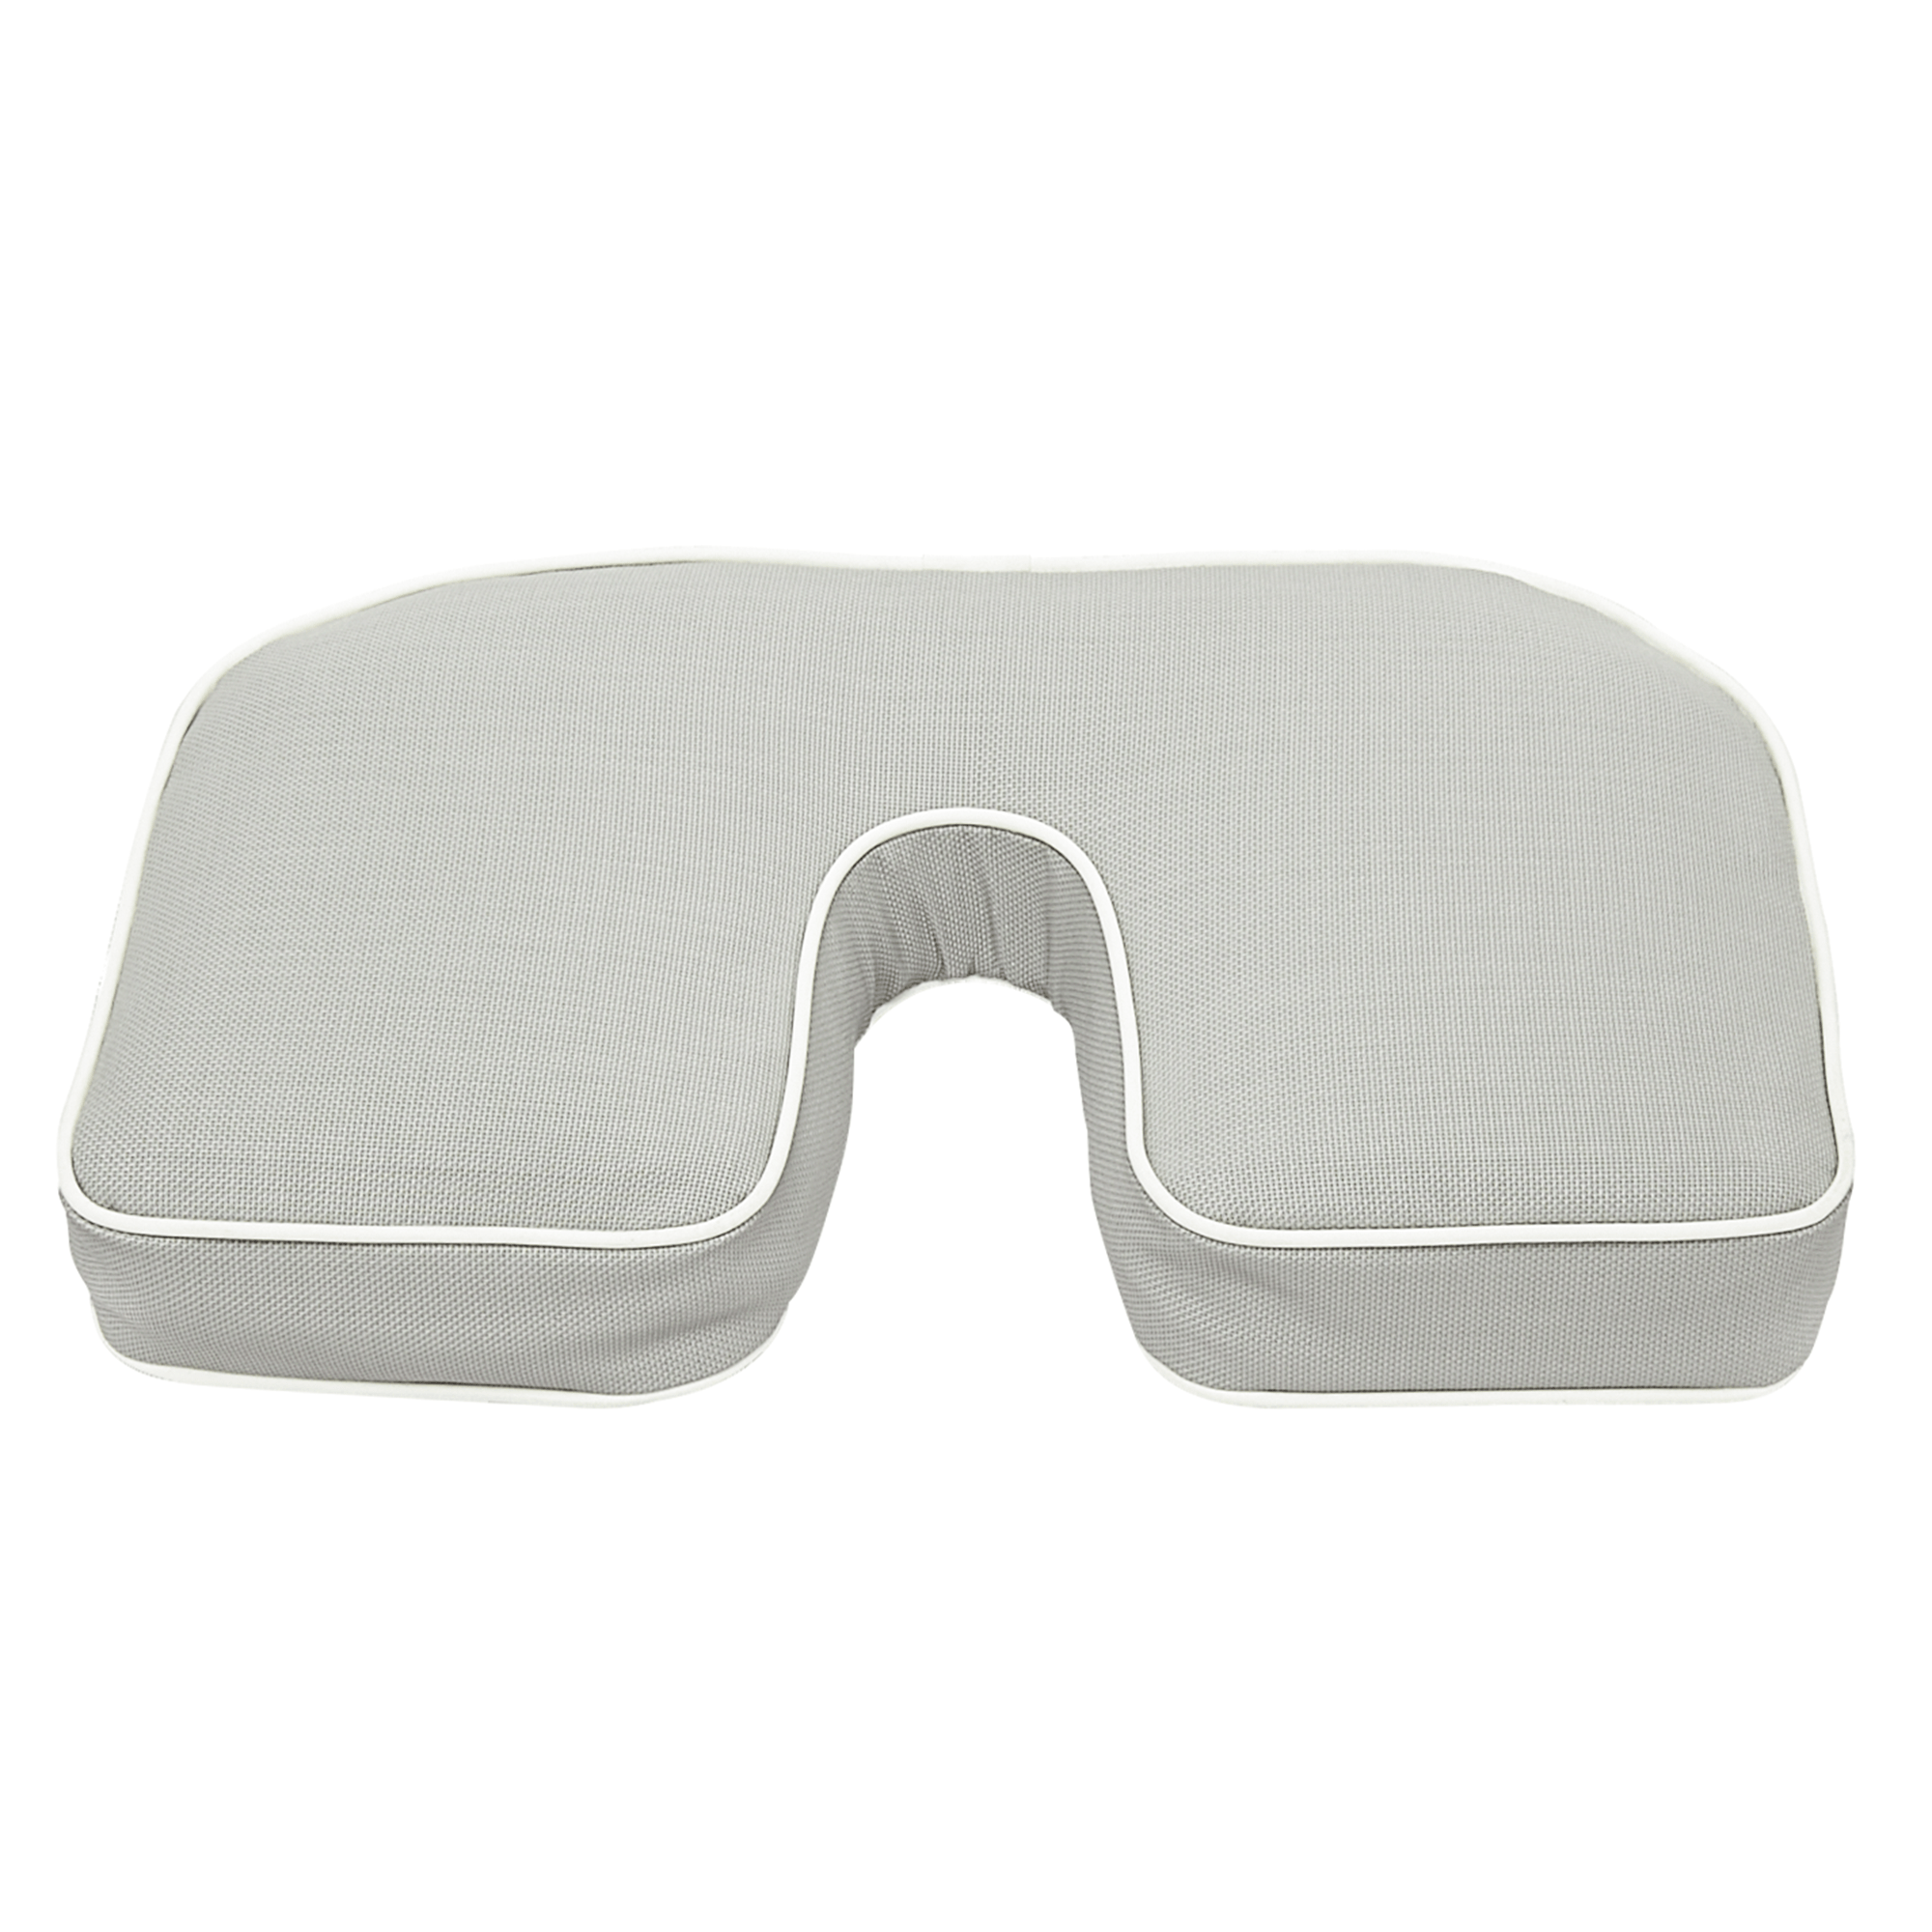 ELLA'S BUBBLES Standard Shape: Seat Pillow and Riser for Walk-In Tubs – SeatRiser-3 (20 1/2″W x 13″L x 3 1/2″H)